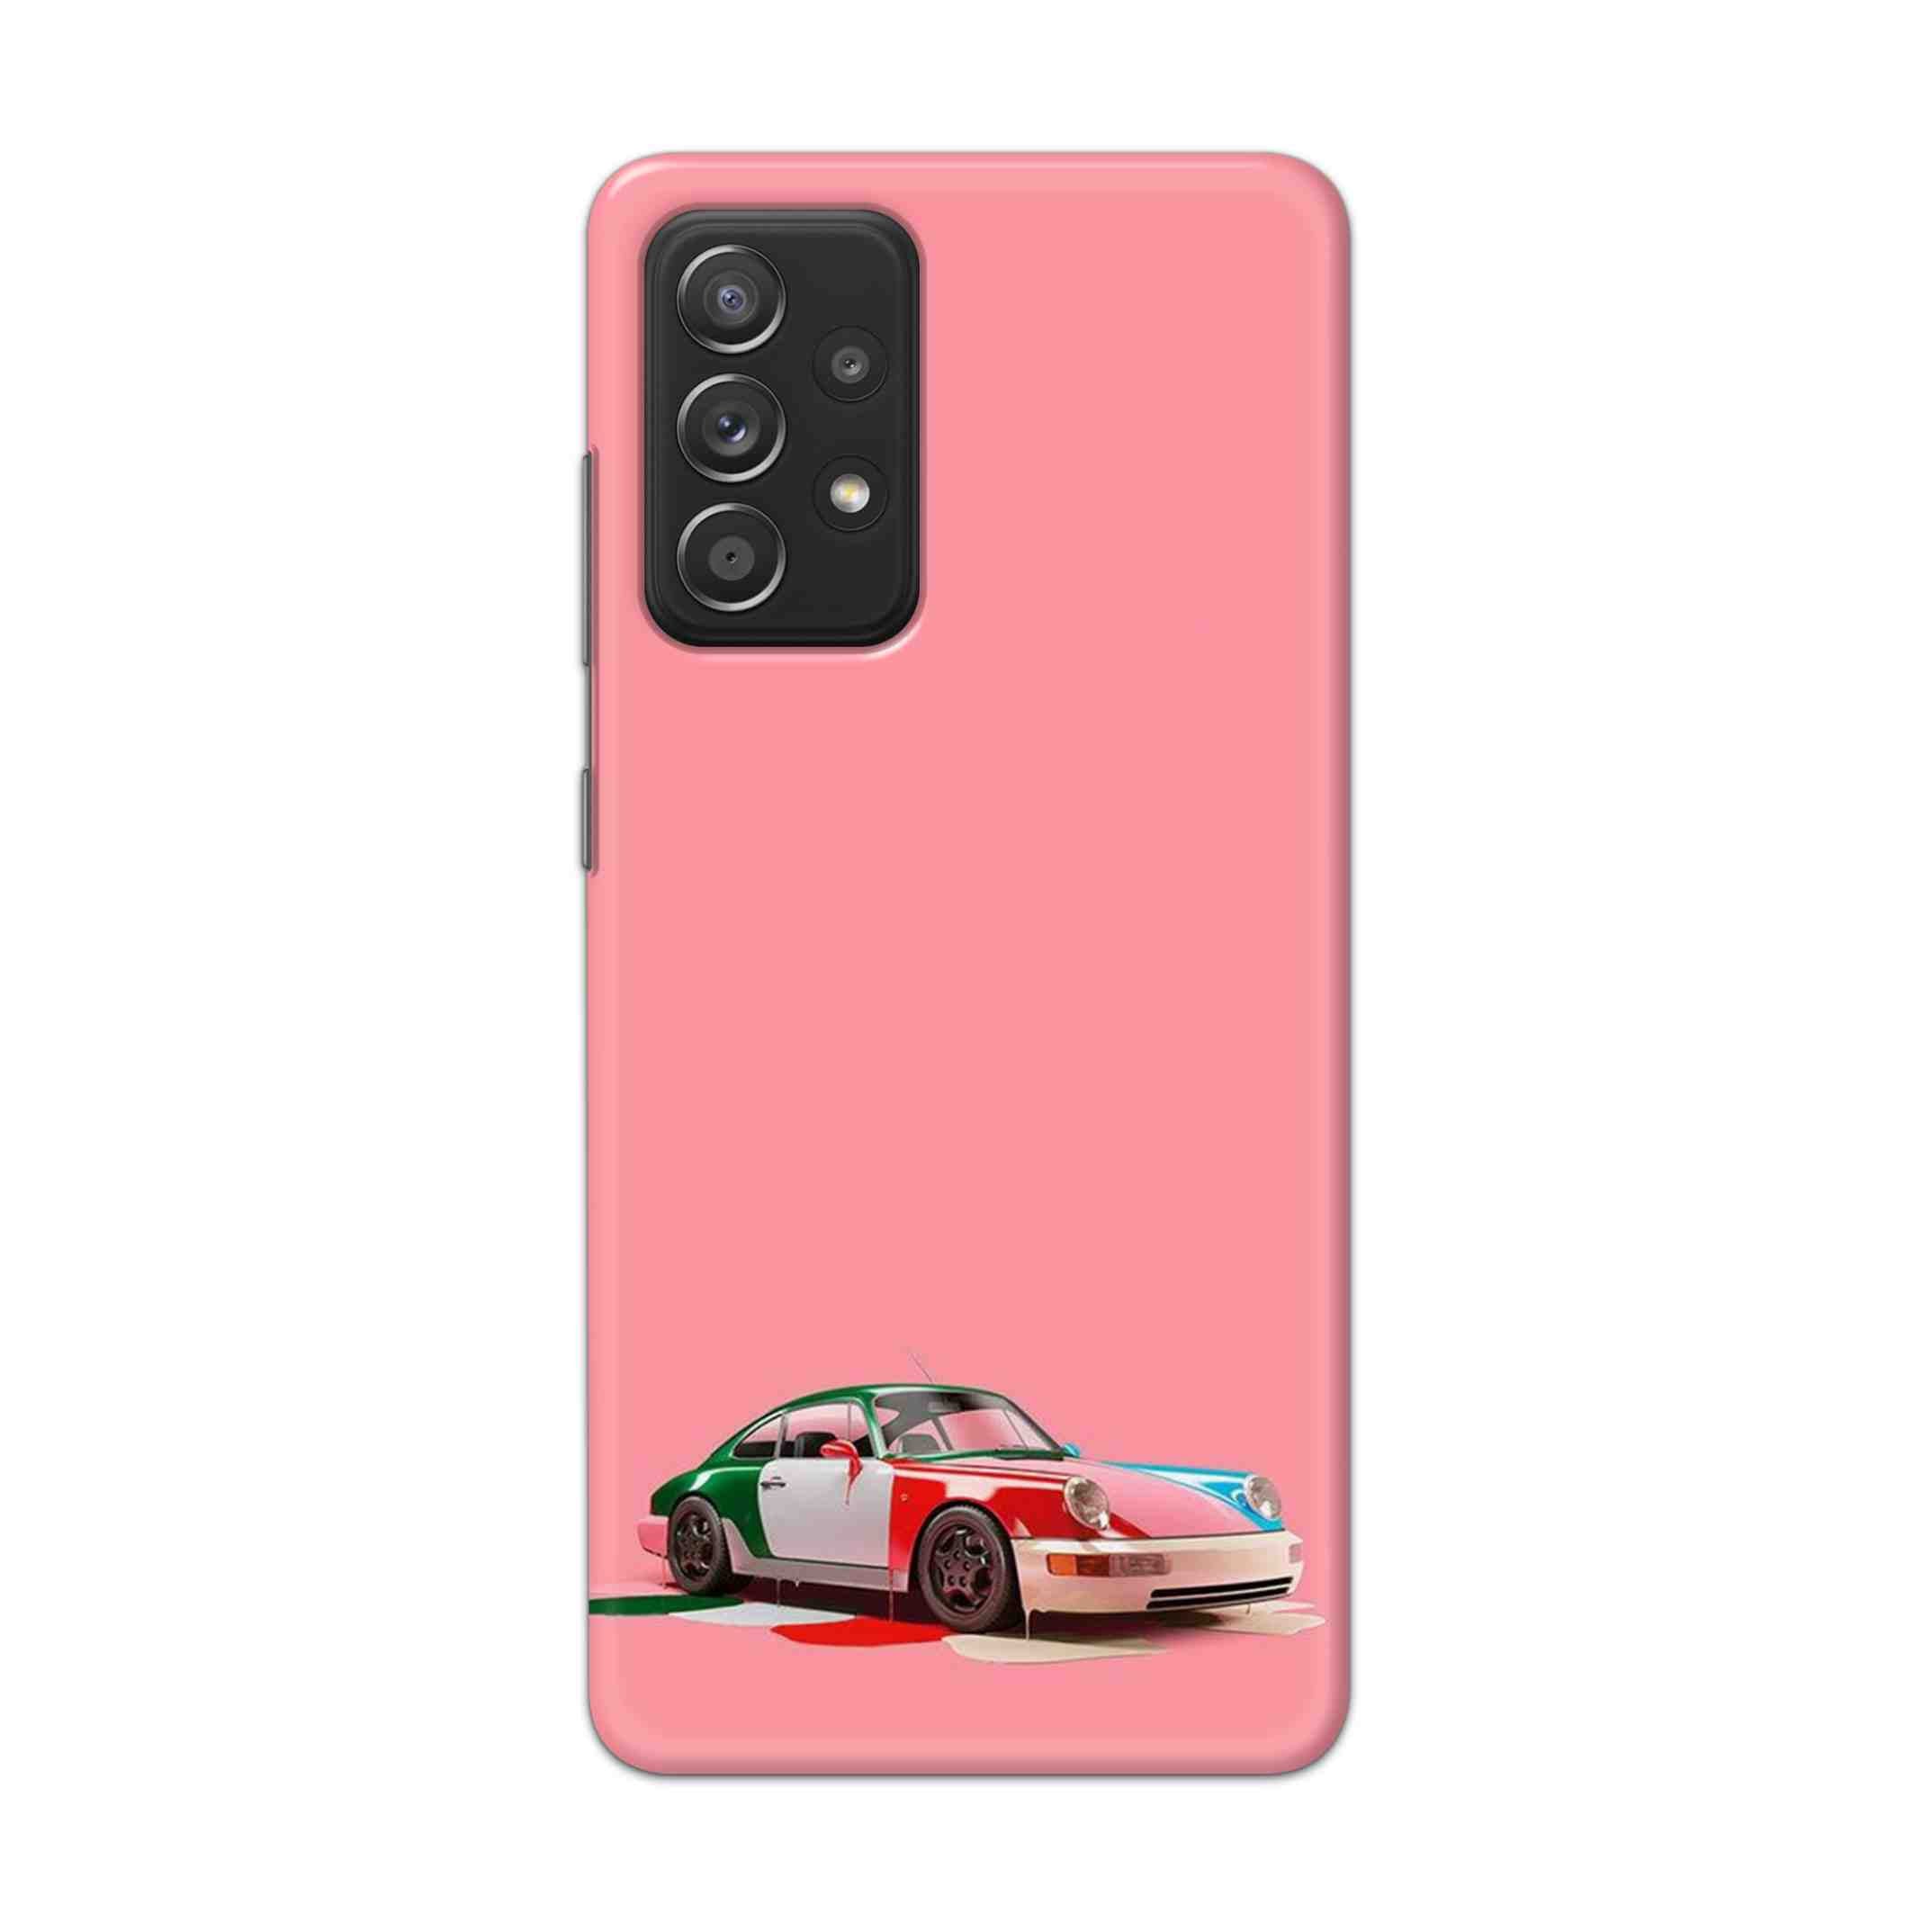 Buy Pink Porche Hard Back Mobile Phone Case Cover For Samsung Galaxy A52 Online